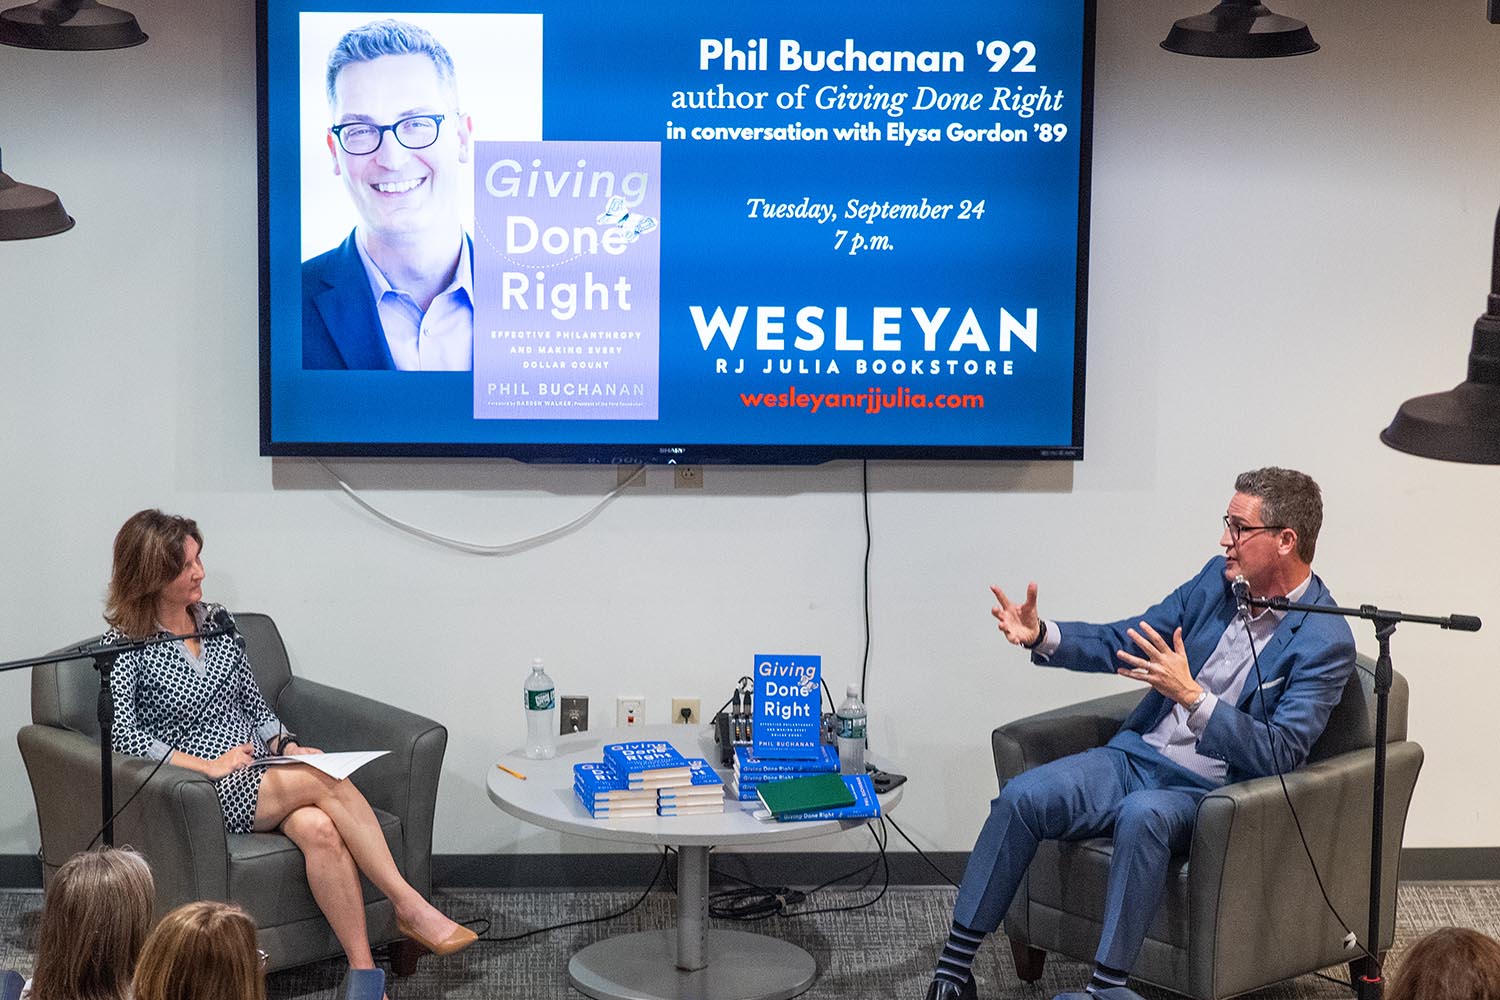 On Sept. 24, Phil Buchanan '92 and Elysa Gordon '89 discussed Buchanan's new book, Giving Done Right: Effective Philanthropy and Making Every Dollar Count at Wesleyan's RJ Julia Bookstore.